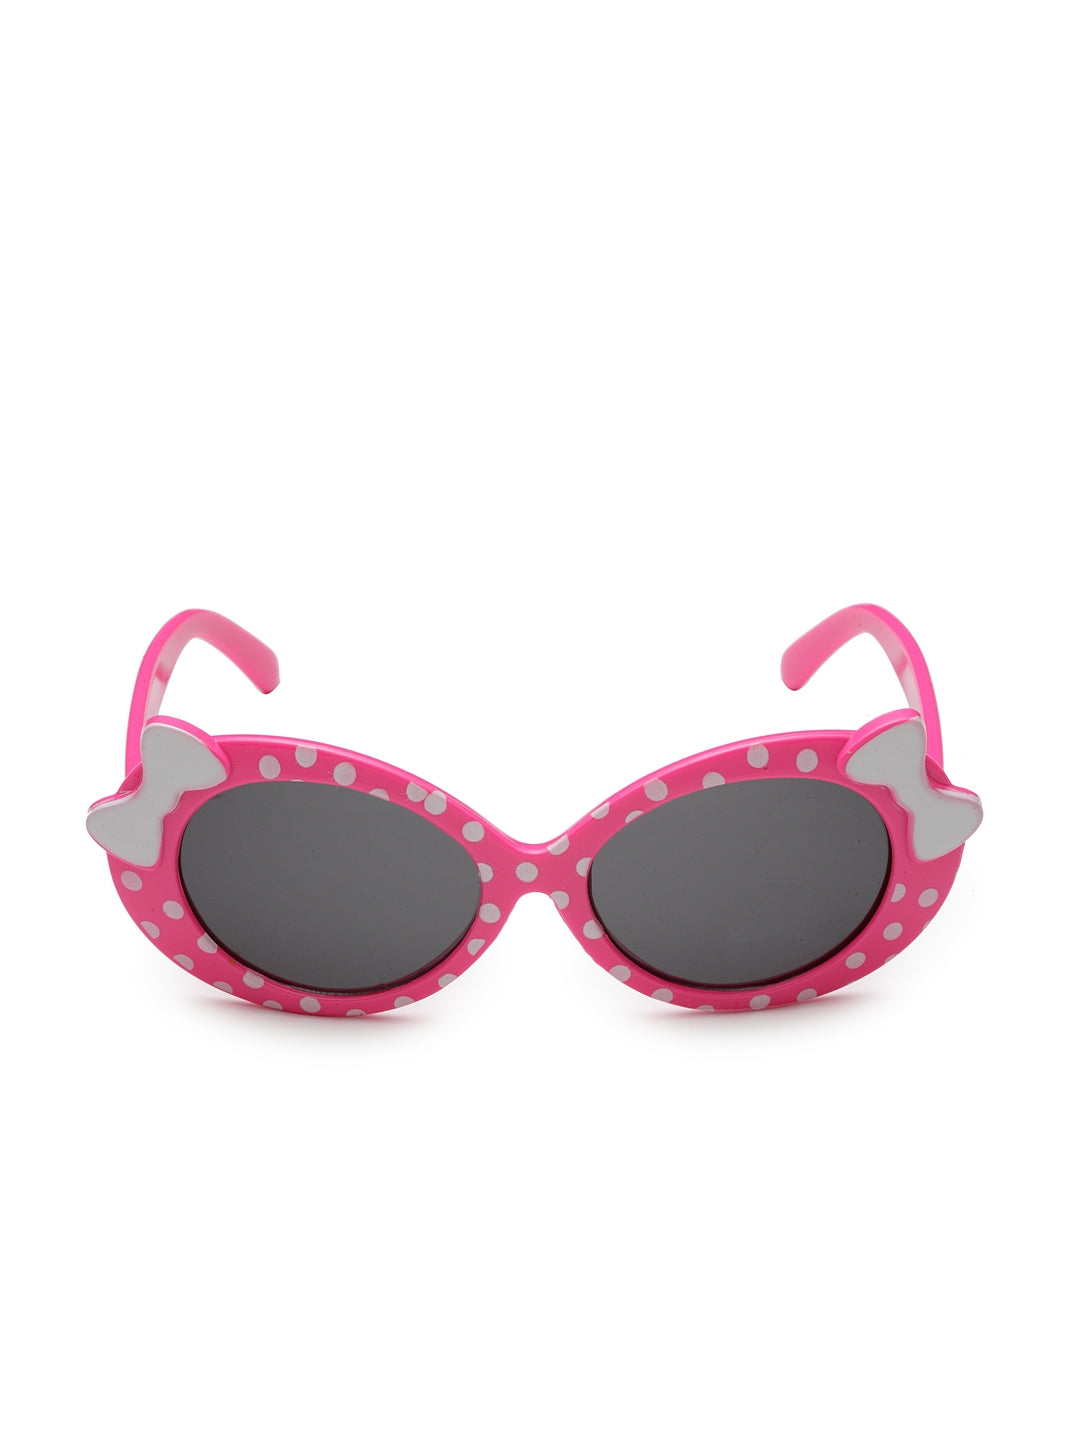 Stol'n Premium Attractive Fashionable UV-Protected Cat Eye Sunglasses - Pink